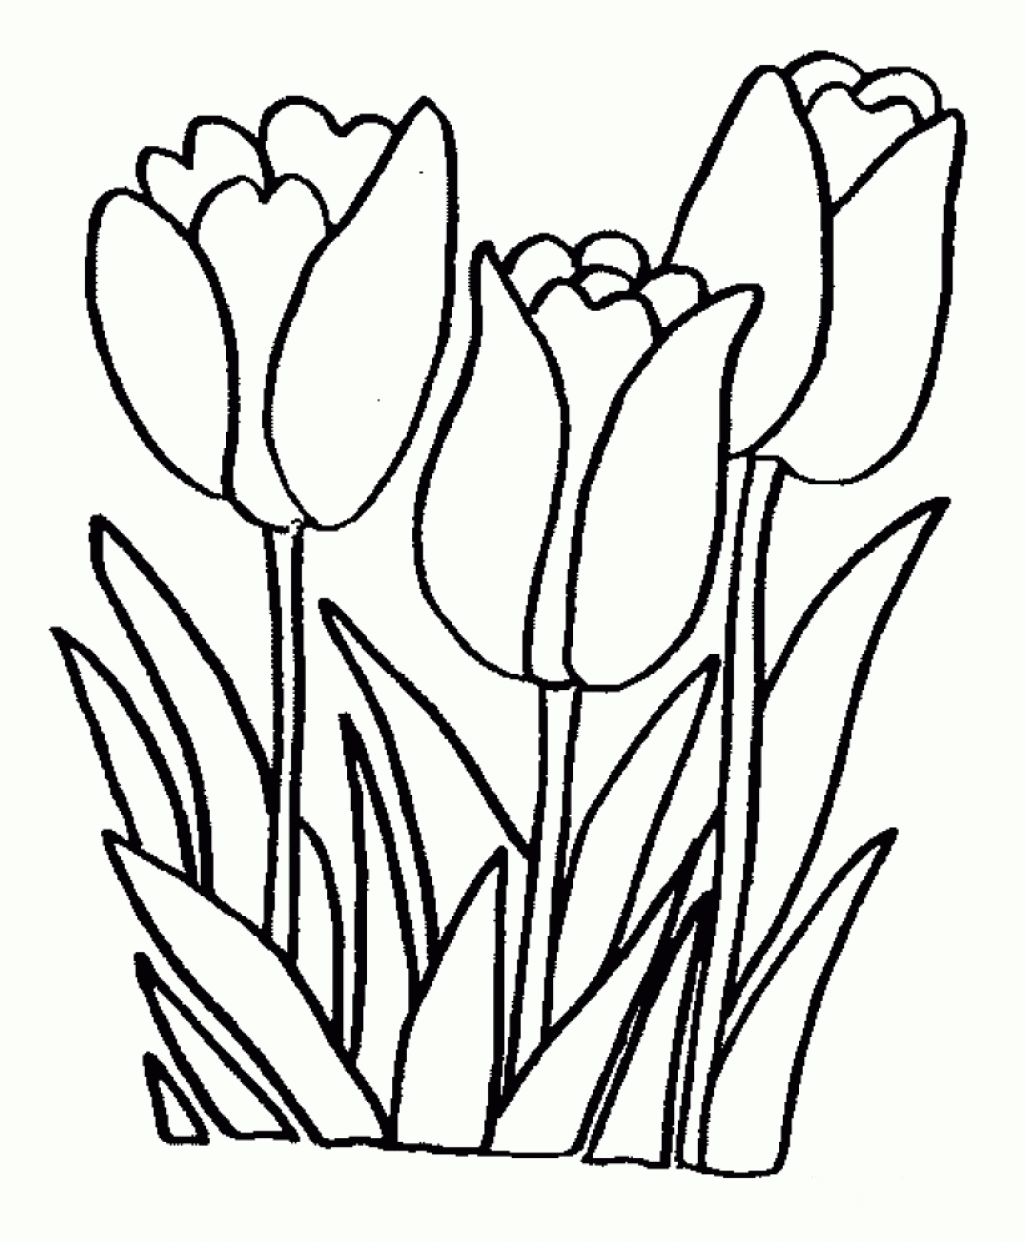 Free Printable Spring Flowers Coloring Pages Coloring Home